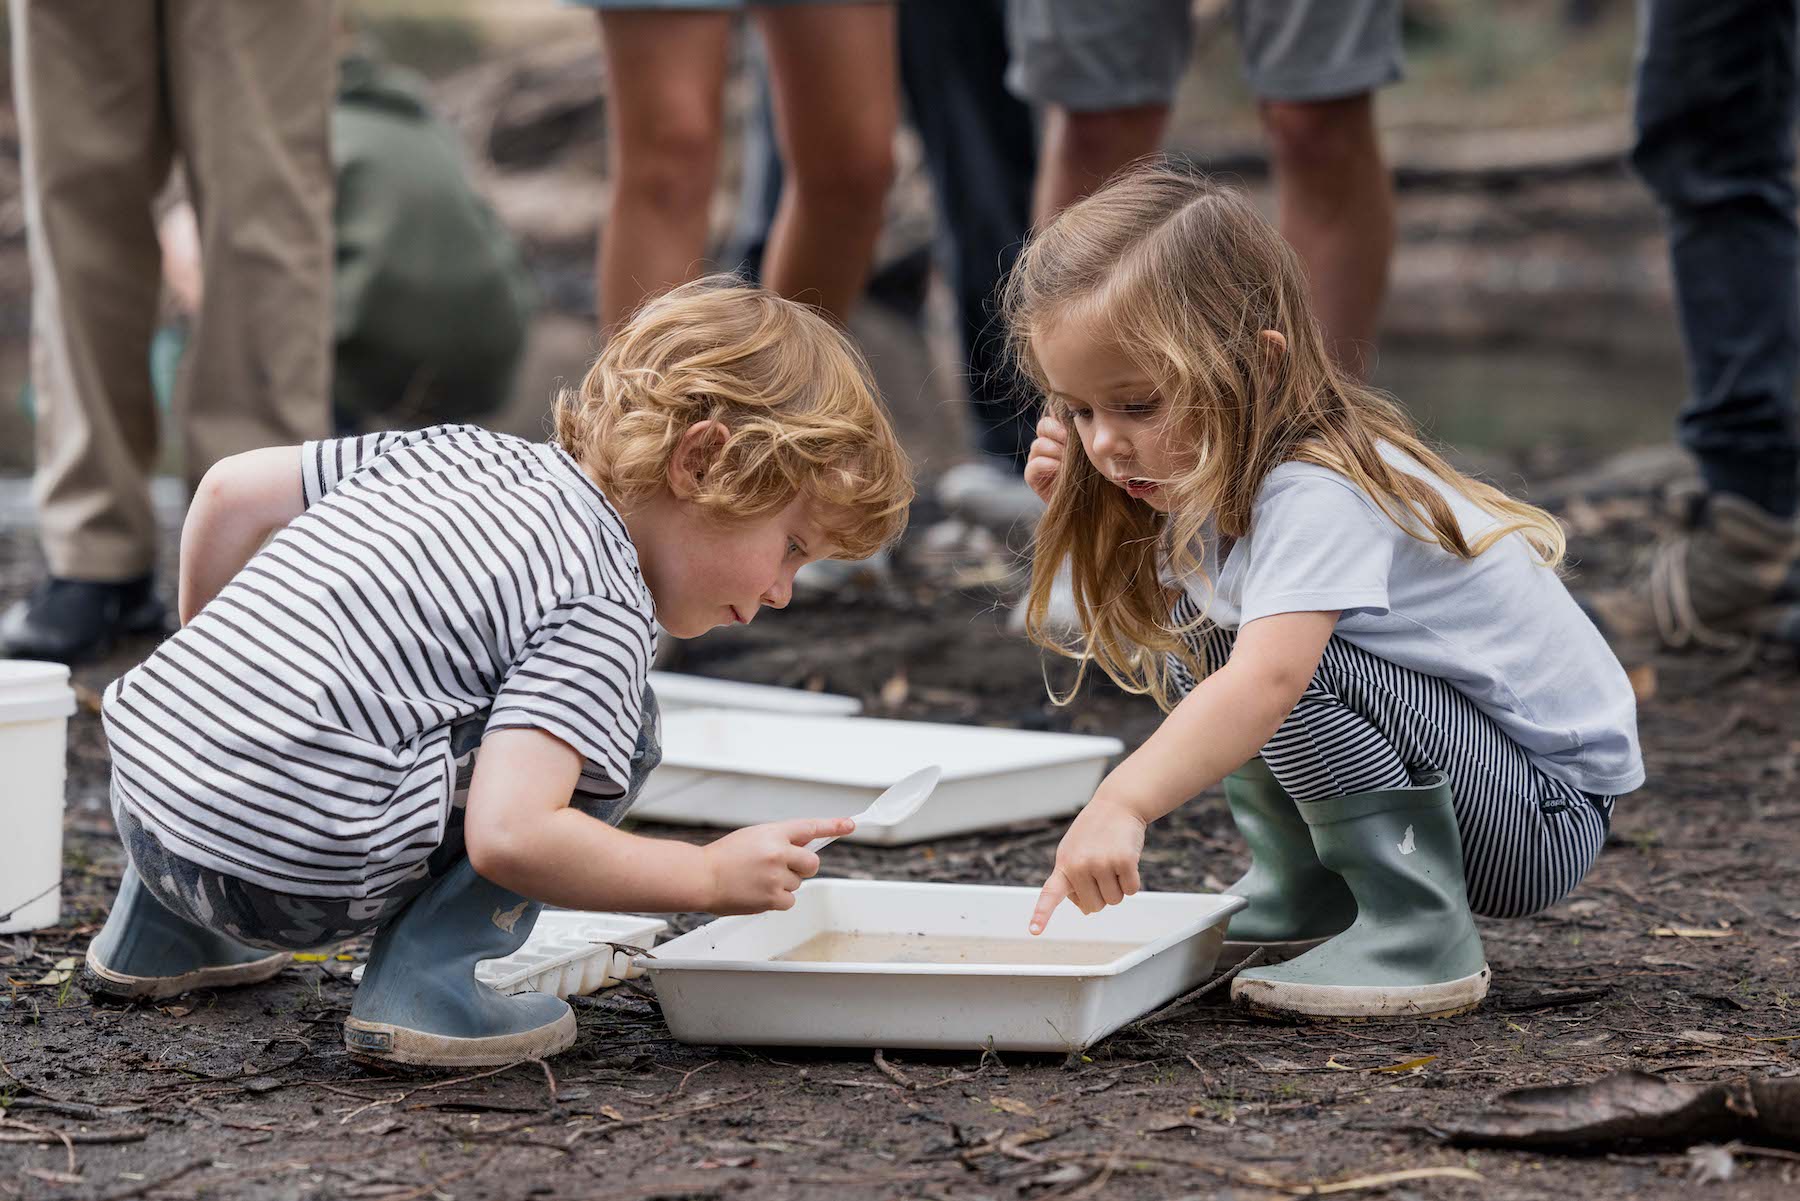 Two young children looking with interest at the contents of a water-filled plastic tray placed on the ground outside.